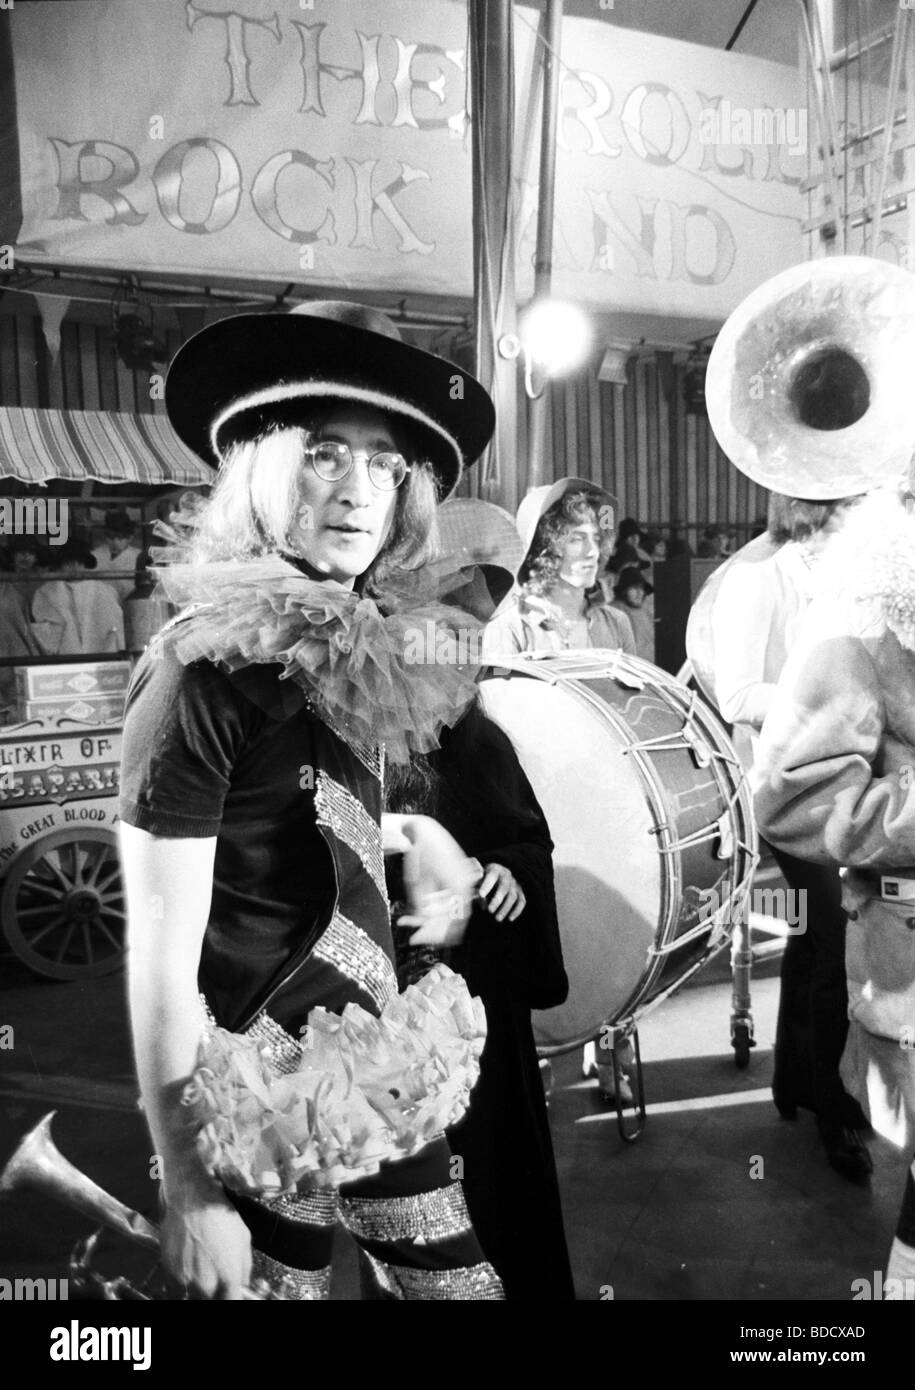 ROCK  AND ROLL CIRCUS - John Lennon on set of the 1968 film with the Beatles, Rolling Stones and Yoko Ono Stock Photo